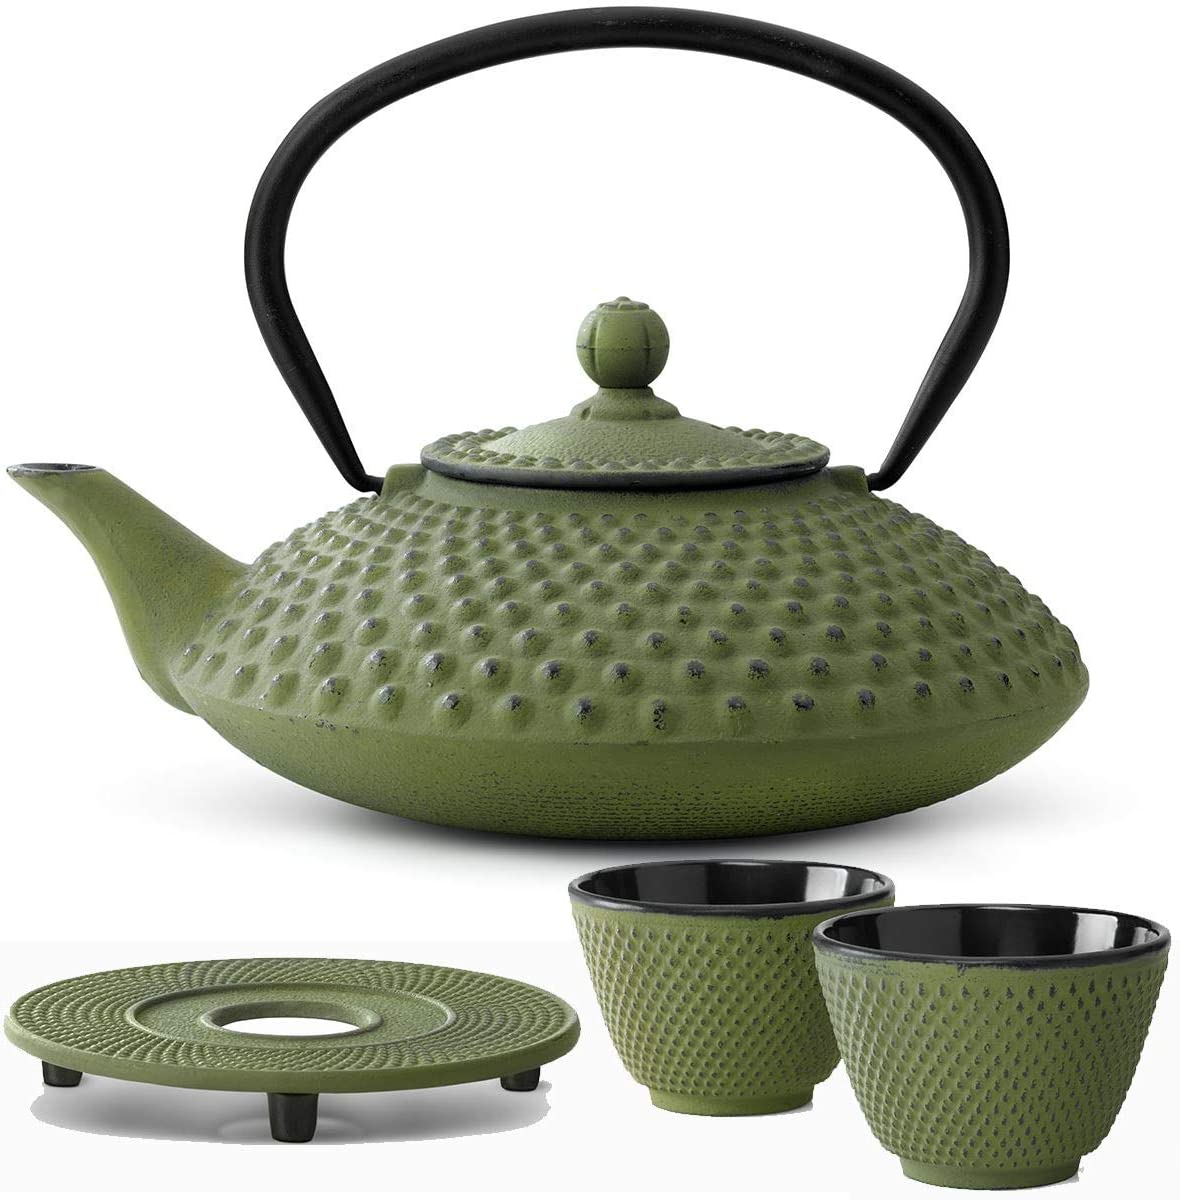 Bredemeijer Teapot Asian Cast Iron Set Green 1.25 Litres with Tea Filter Strainer with Warmer and Tea Cup (2 Cups) Green